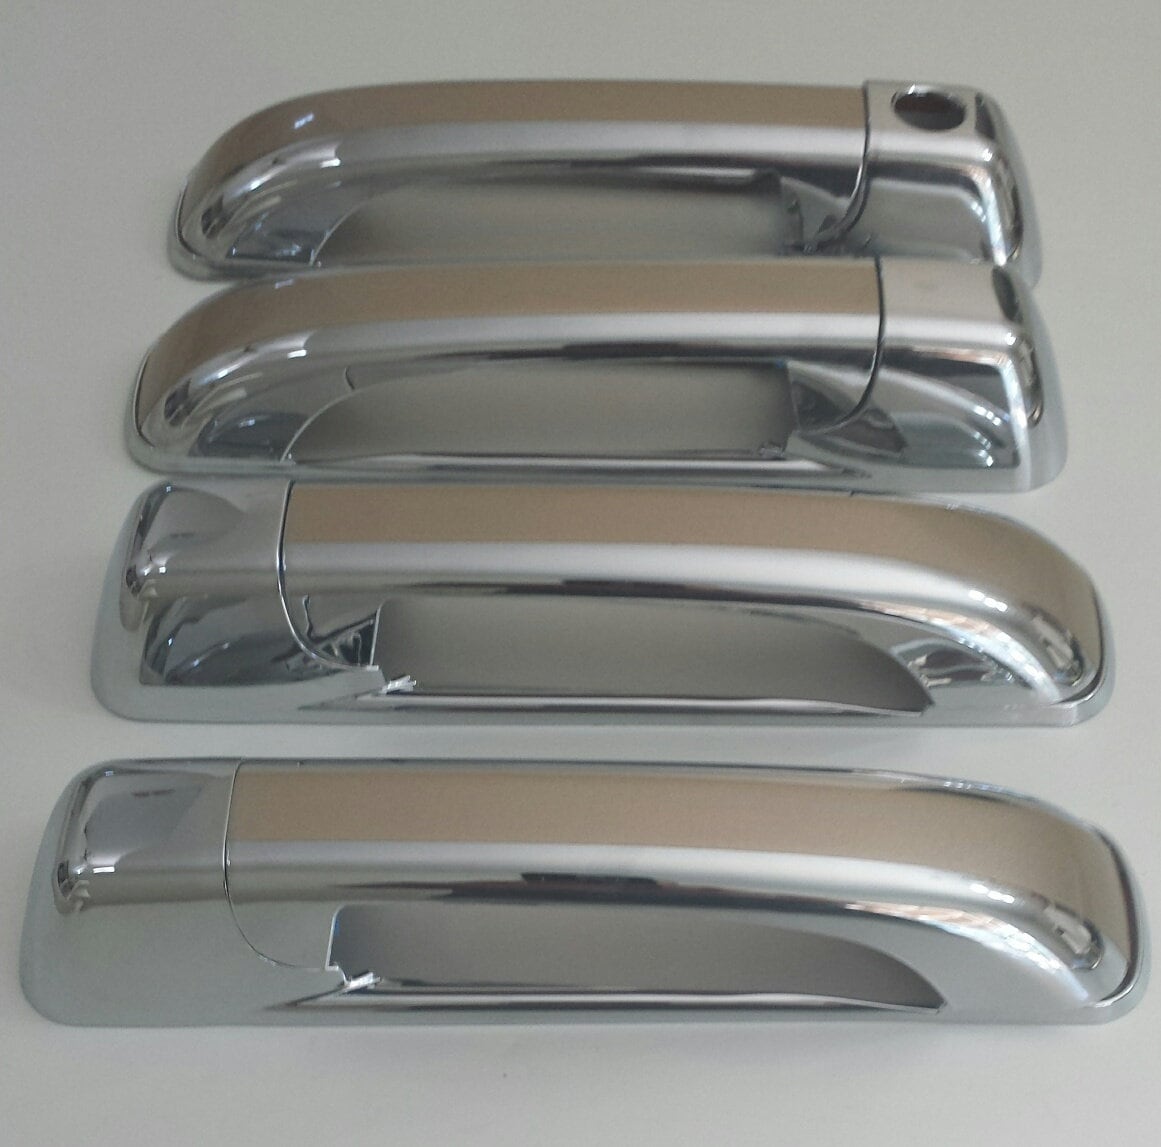 Full Set of Custom Black OR Chrome Door Handle Overlays / Covers For the 2010 - 2022 Dodge Ram 3500 -- You Choose the Middle Color Insert